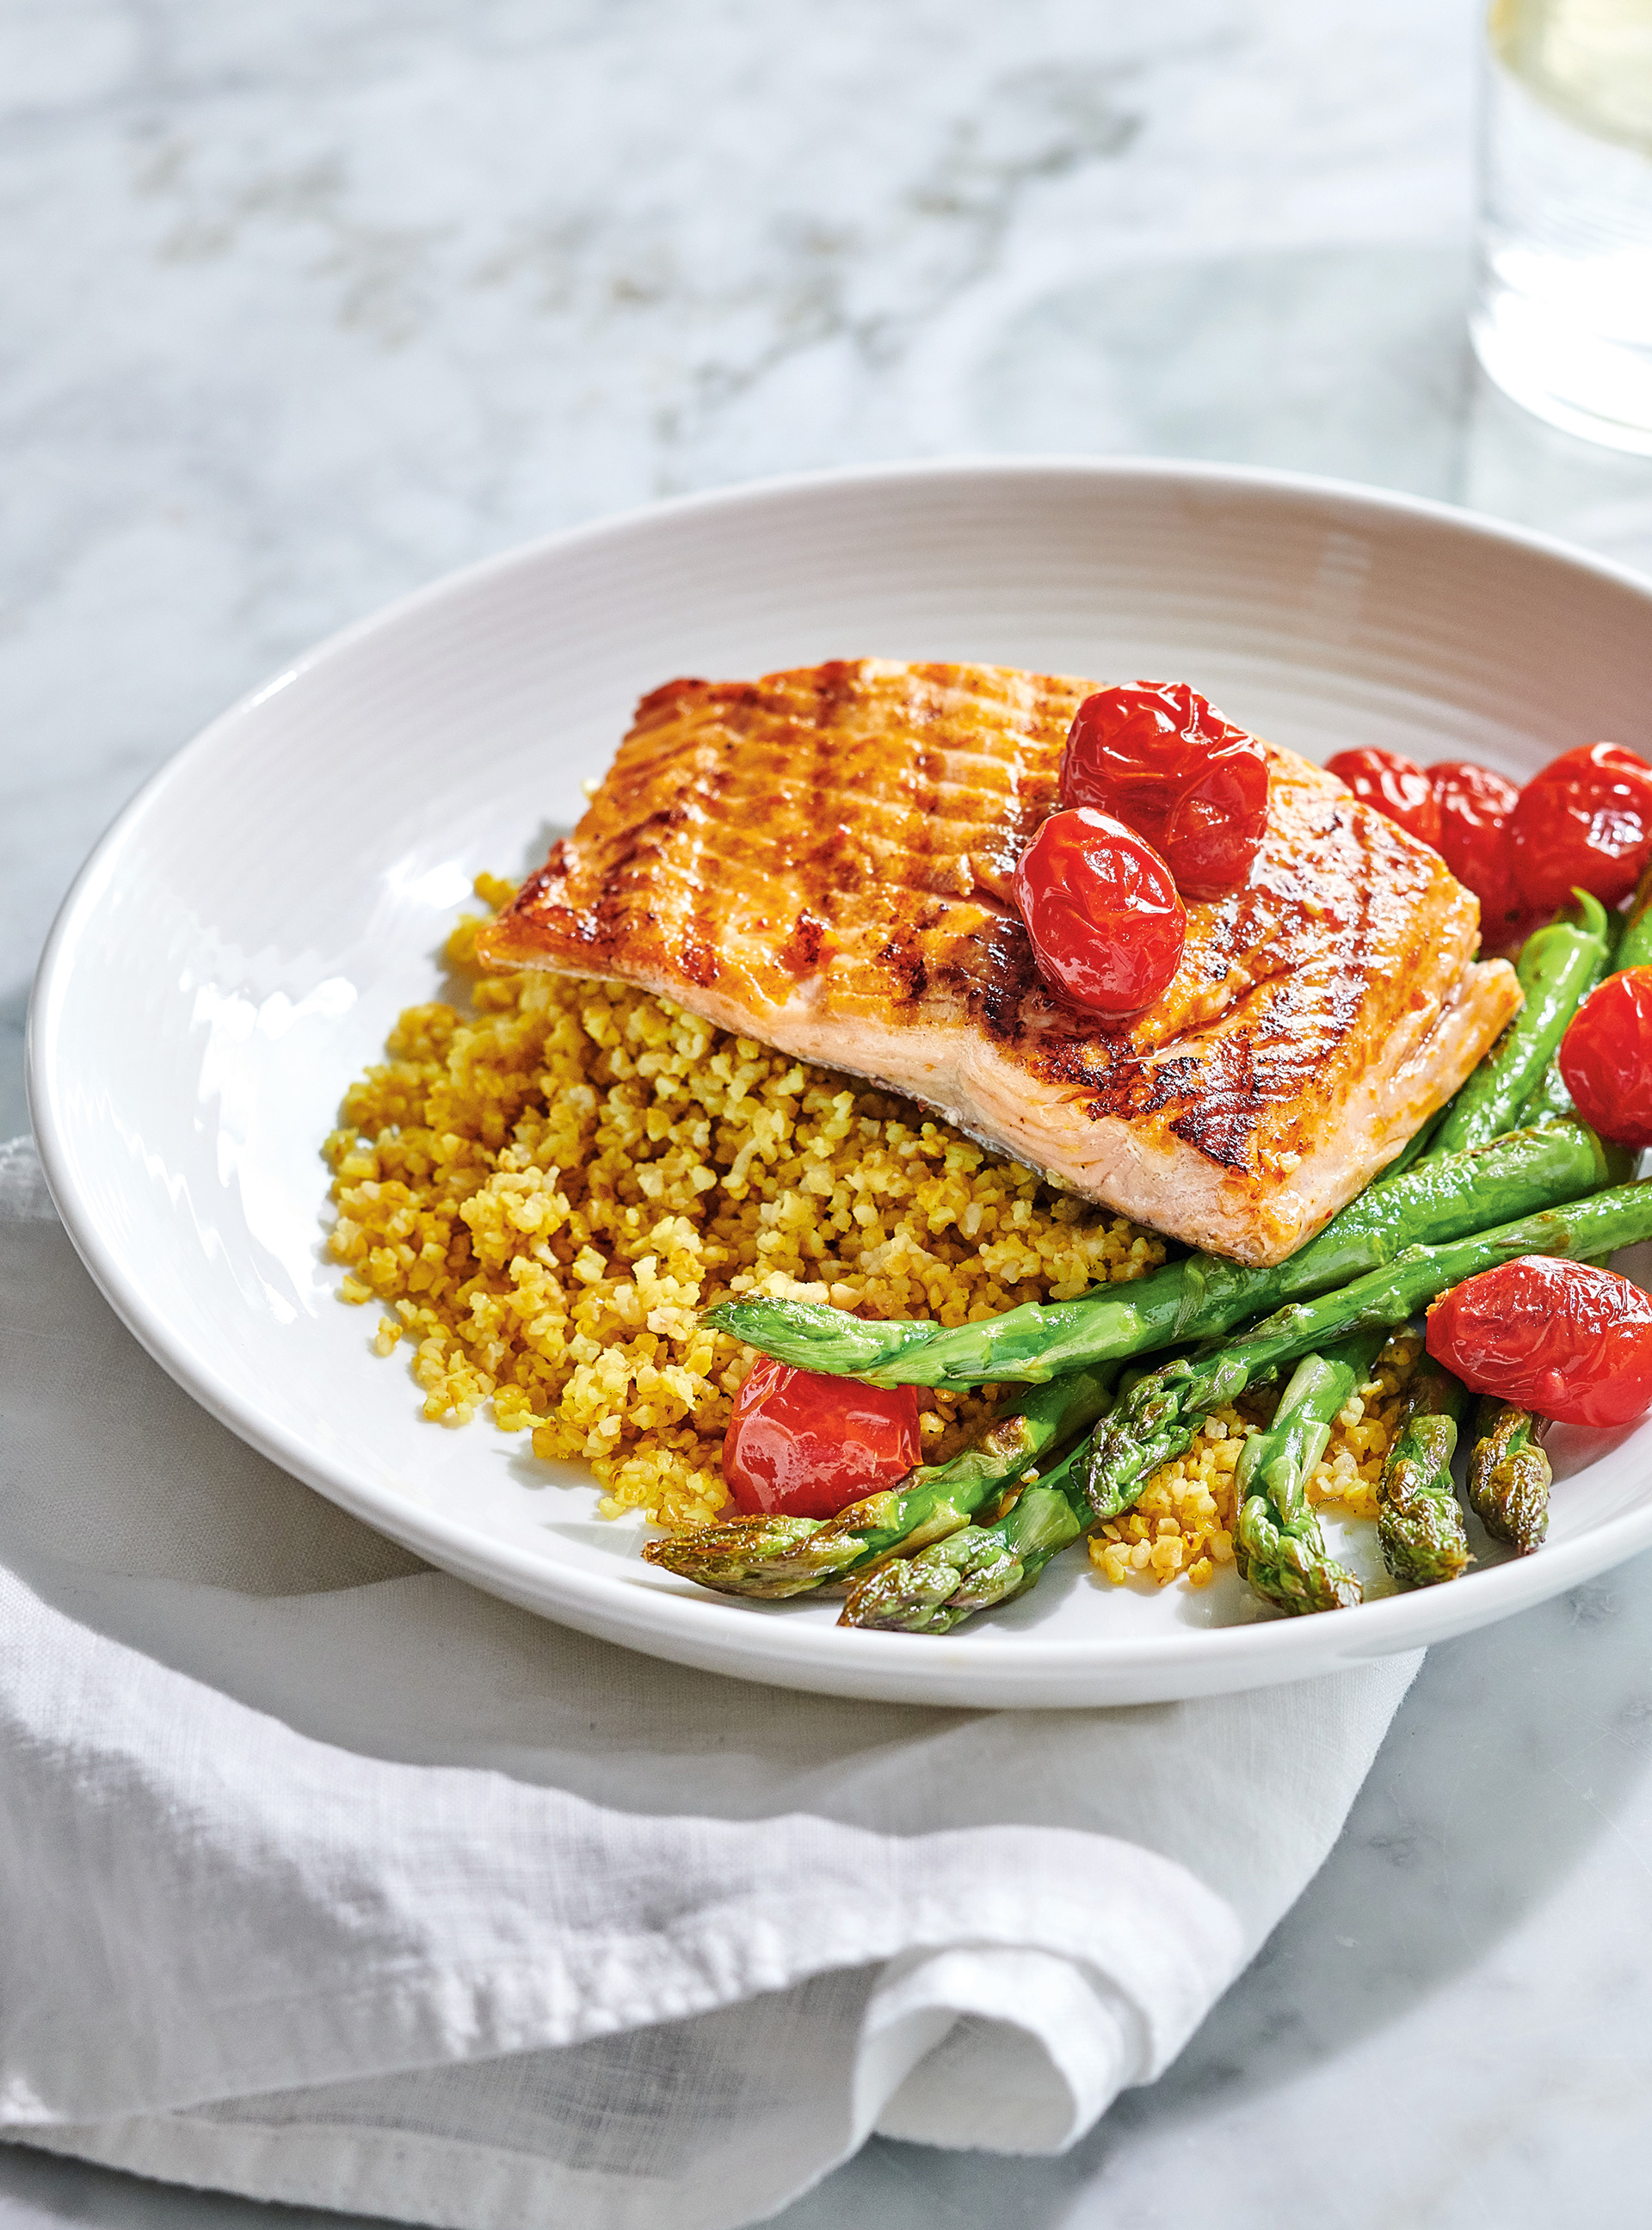 Grilled Trout with Curried Bulgur, Asparagus and Cherry Tomatoes